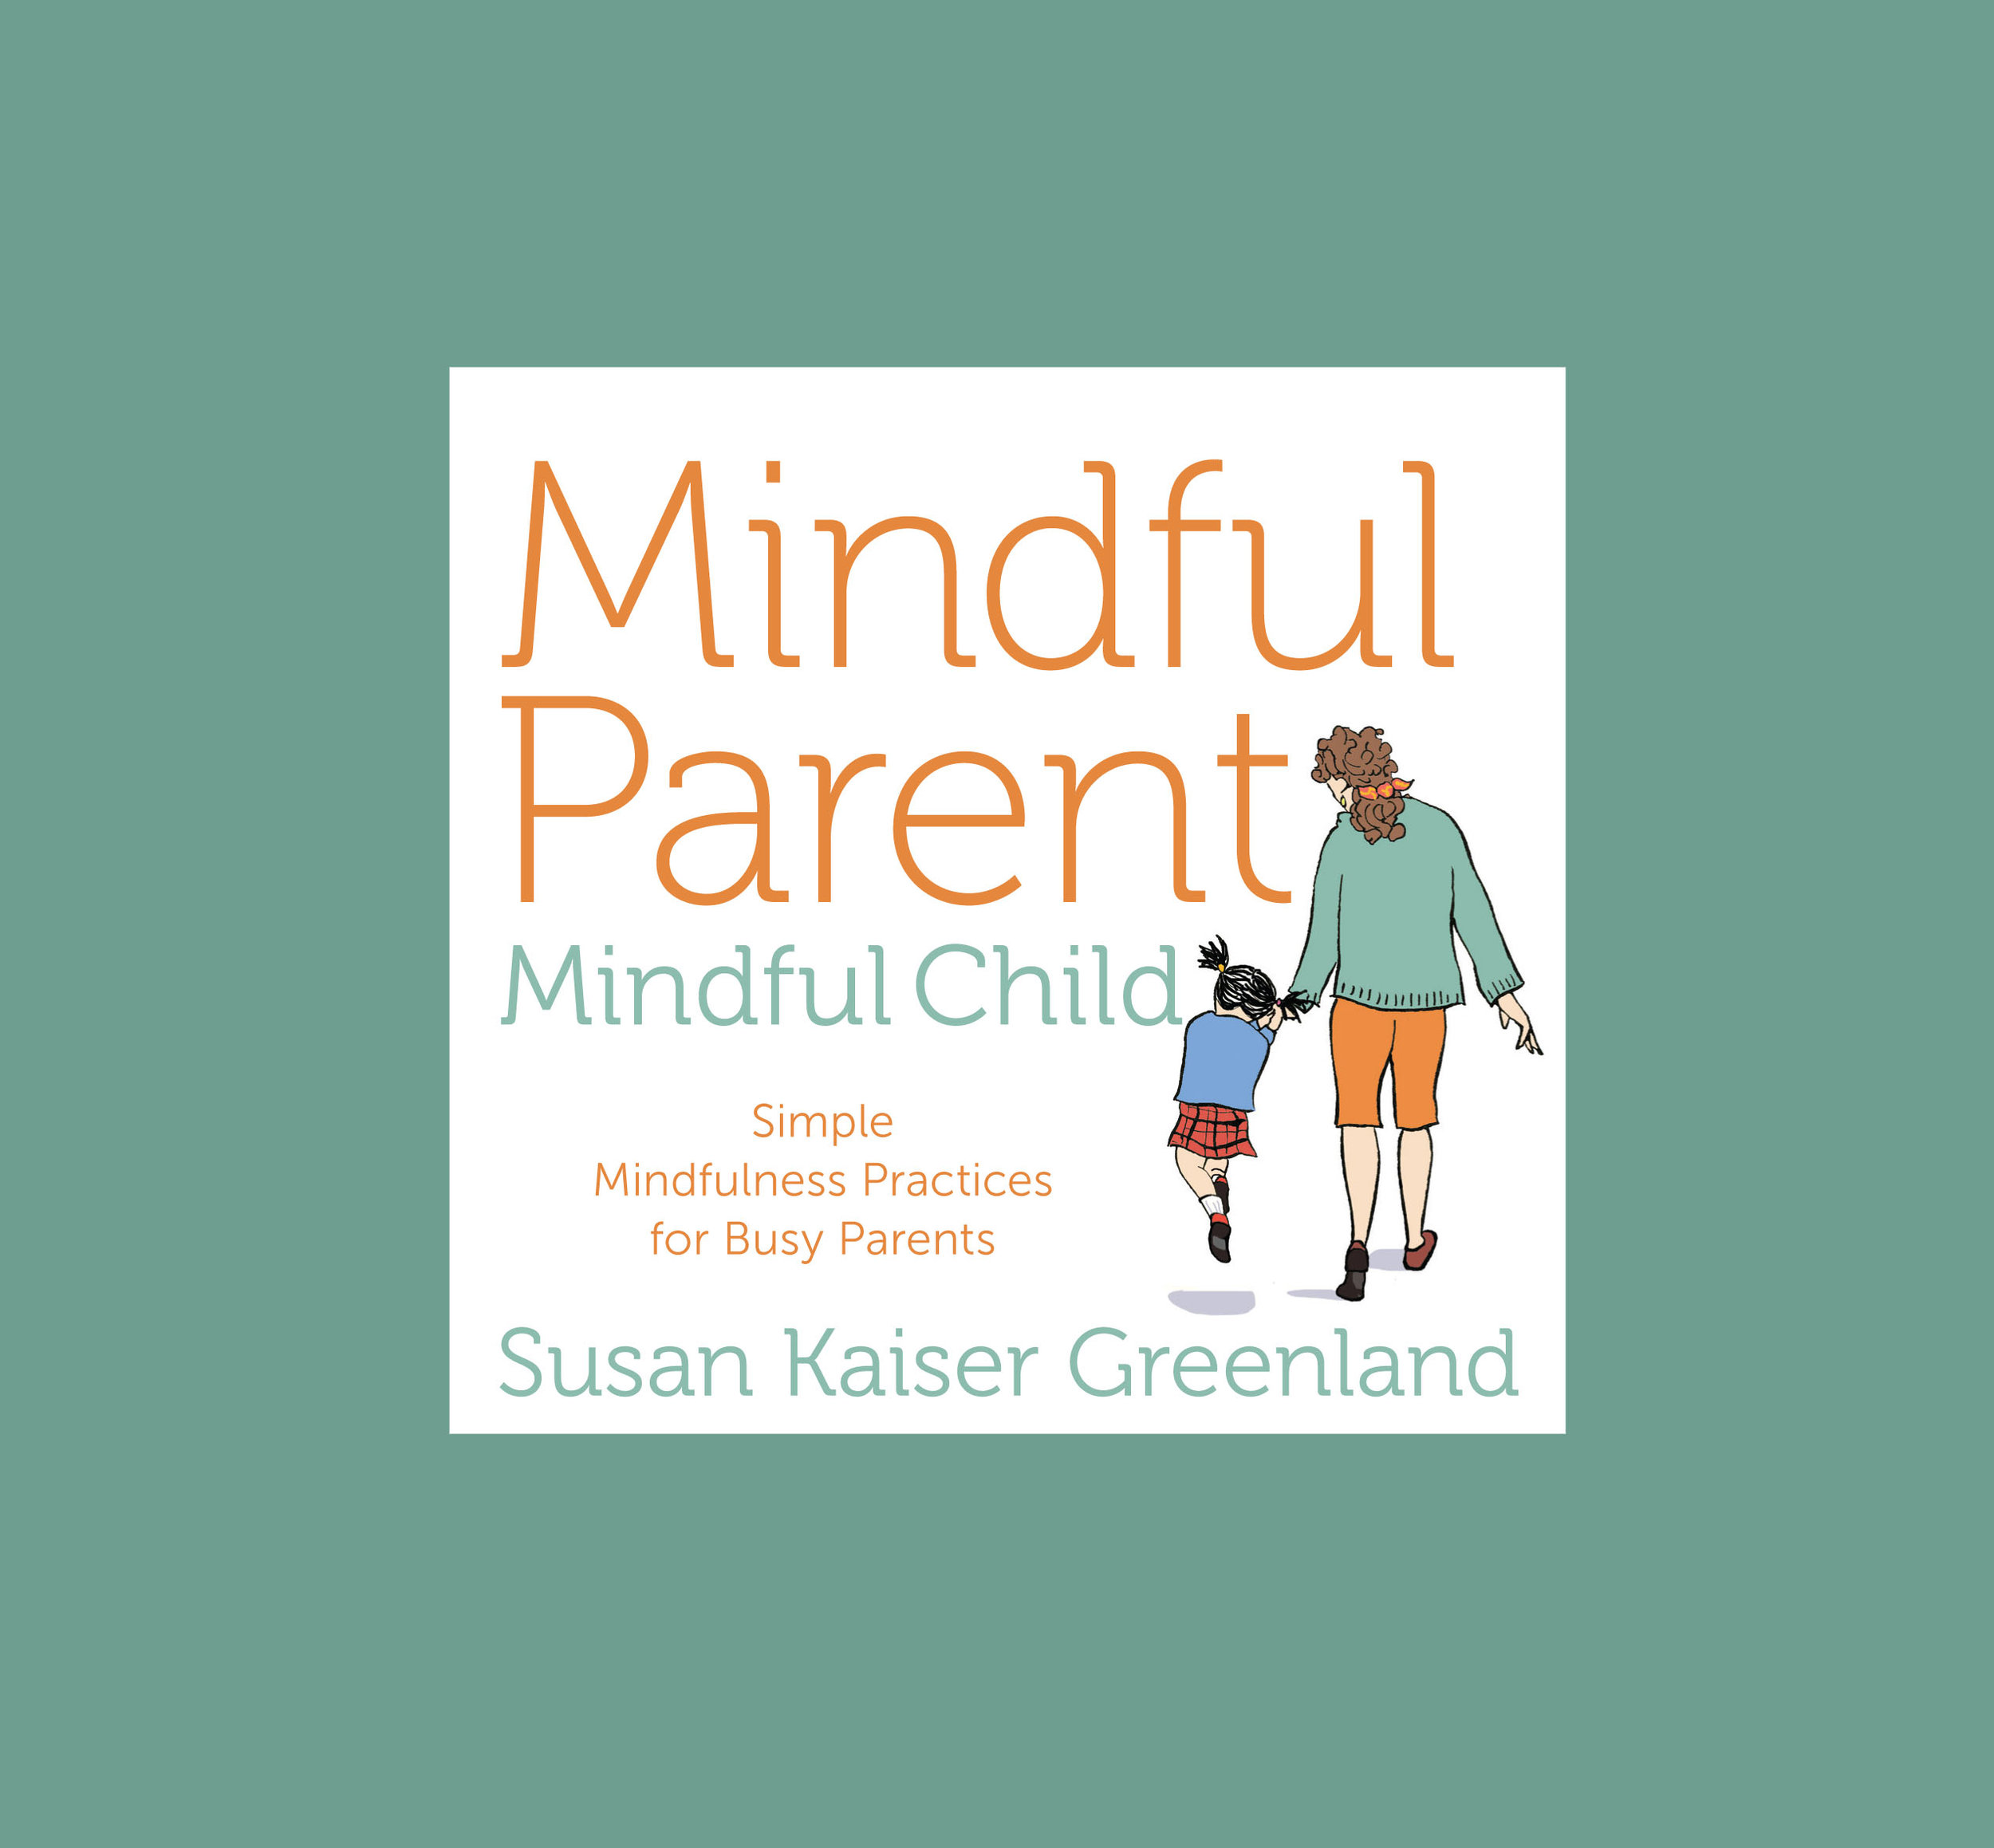 Mindful Parenting: Nurturing Growth with Presence